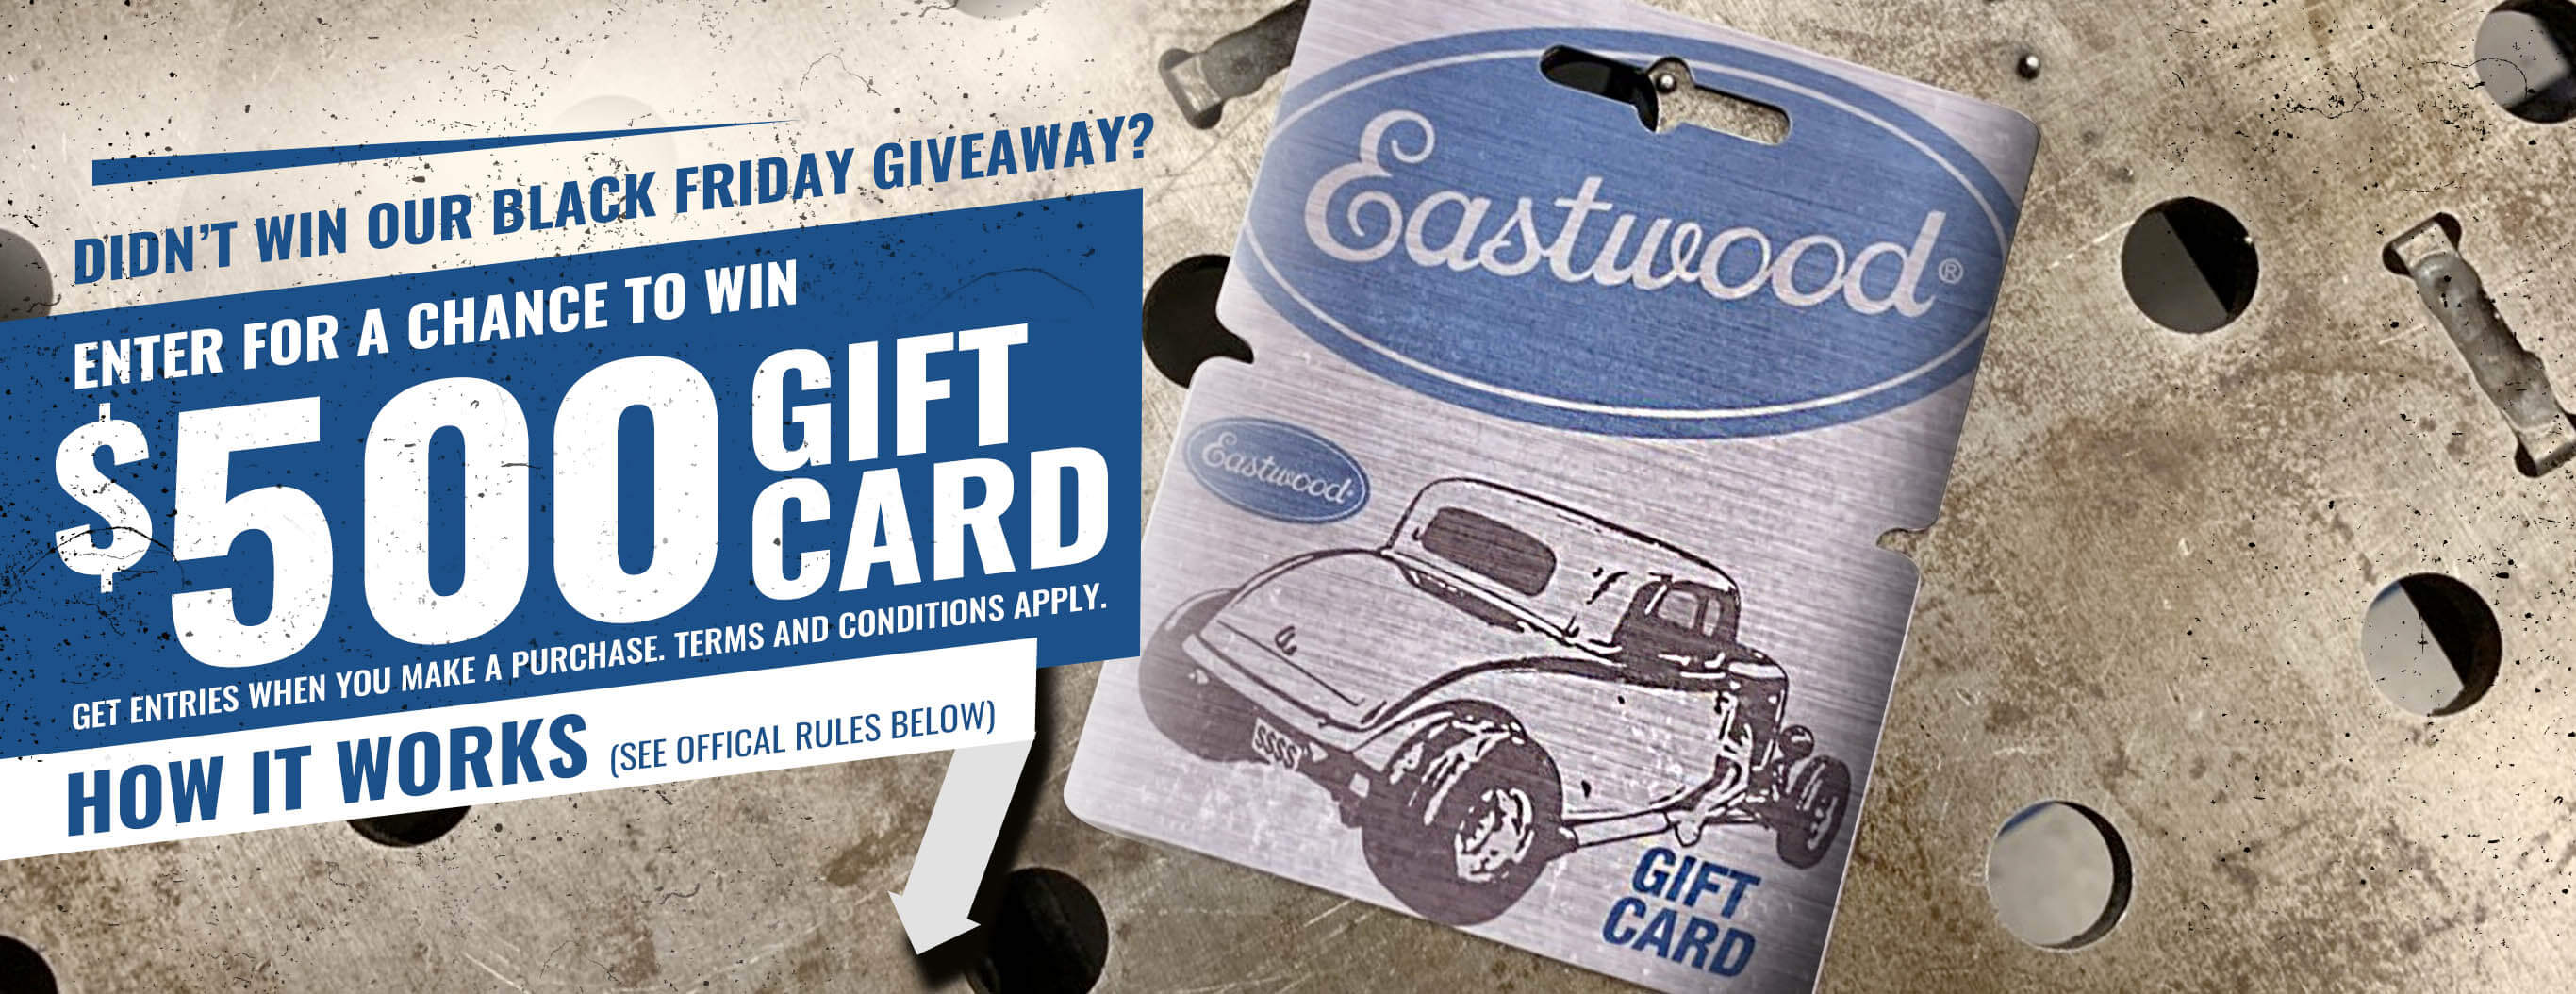 $500 Eastwood Gift Card Giveaway